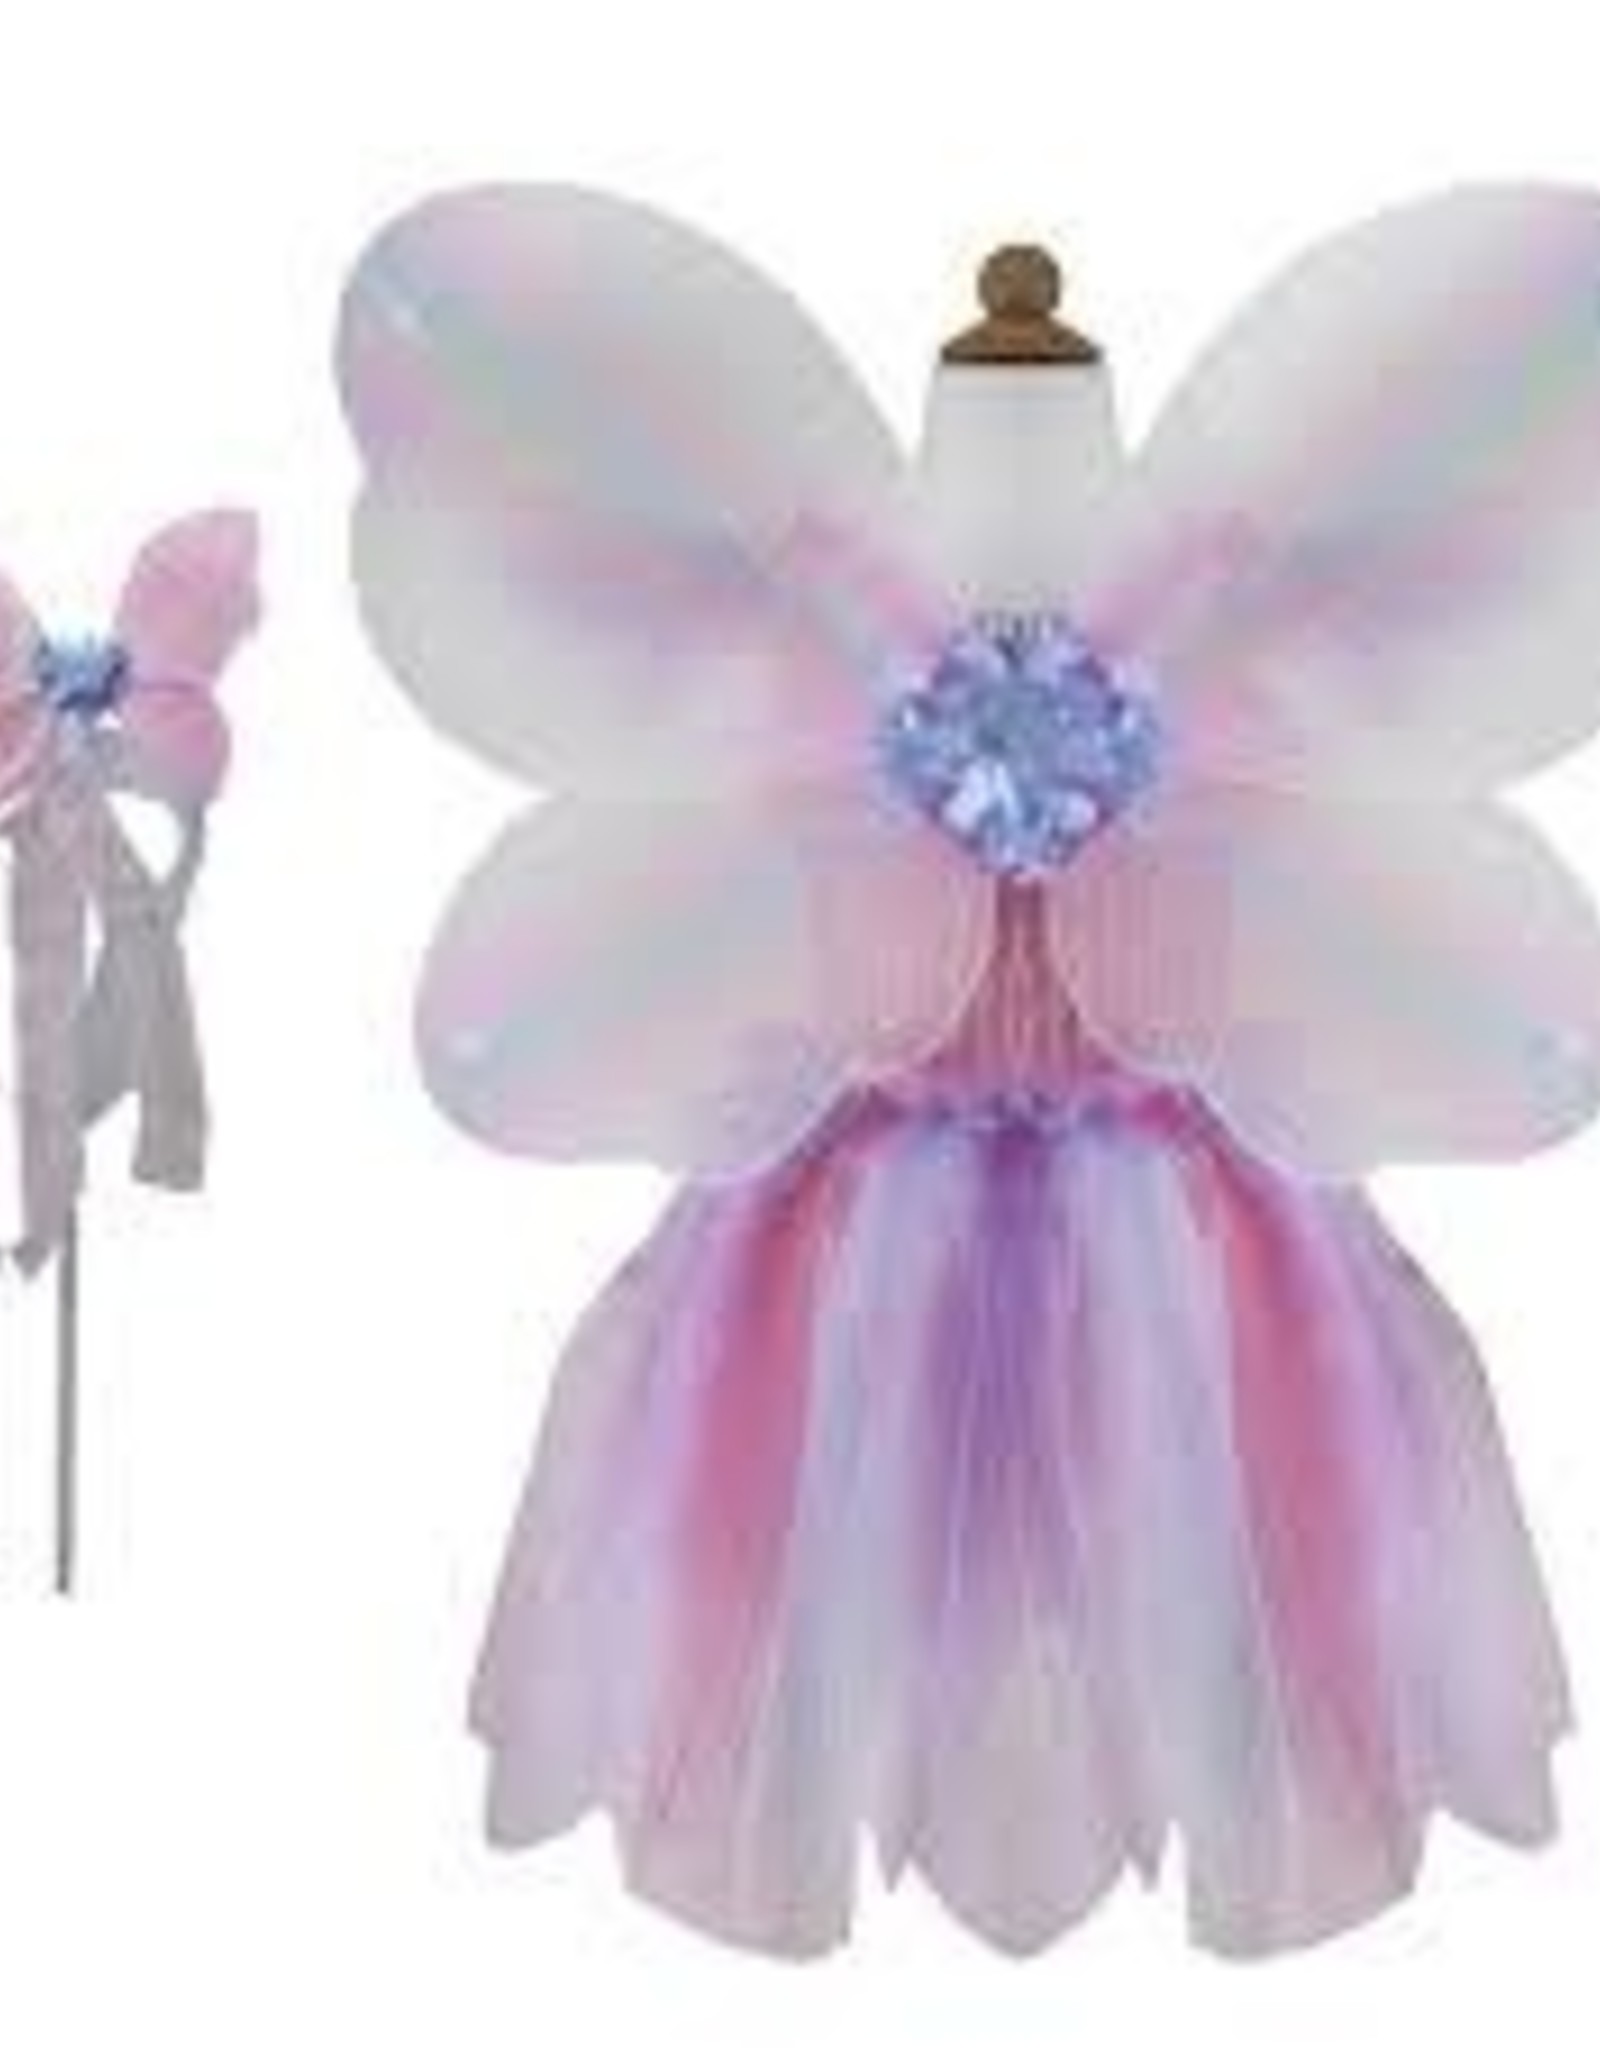 Great Pretenders Butterfly Dress & Wings With Wand, Pink/Multi, Size 5-6